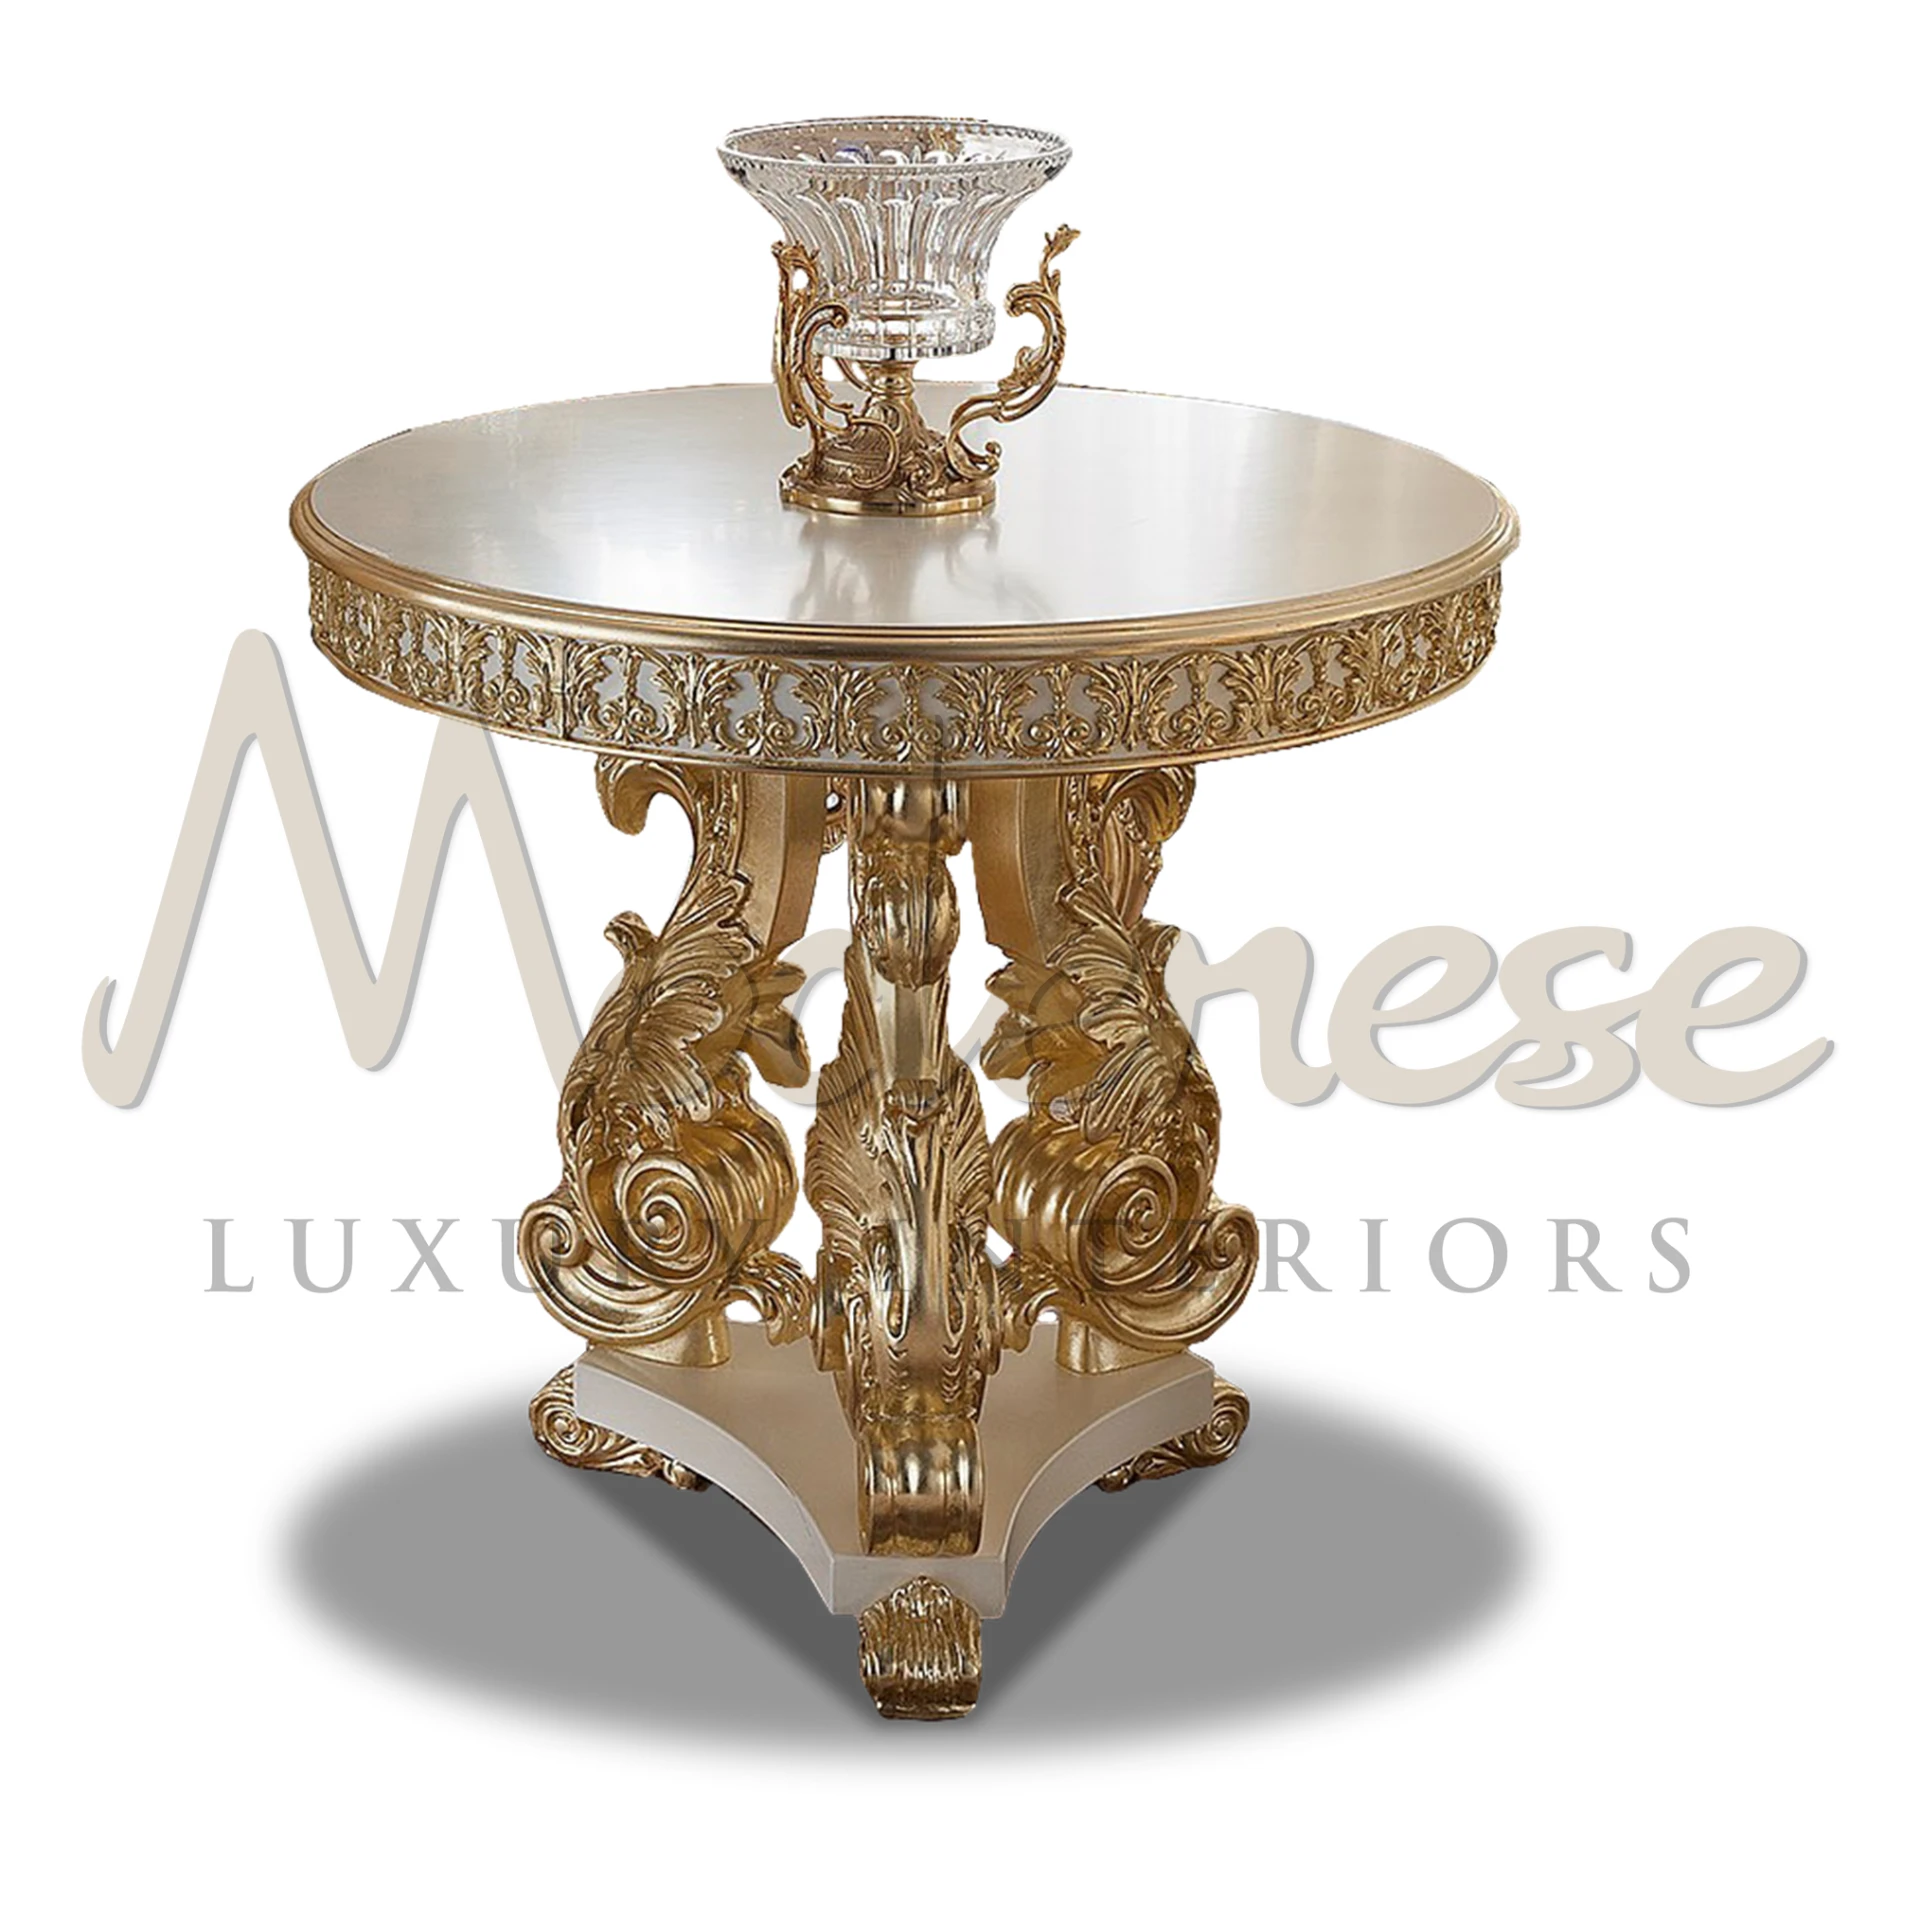  Luxurious Classic Gold Leaf Central Table with elegant handmade carvings and ivory finish, perfect for sophisticated living spaces.